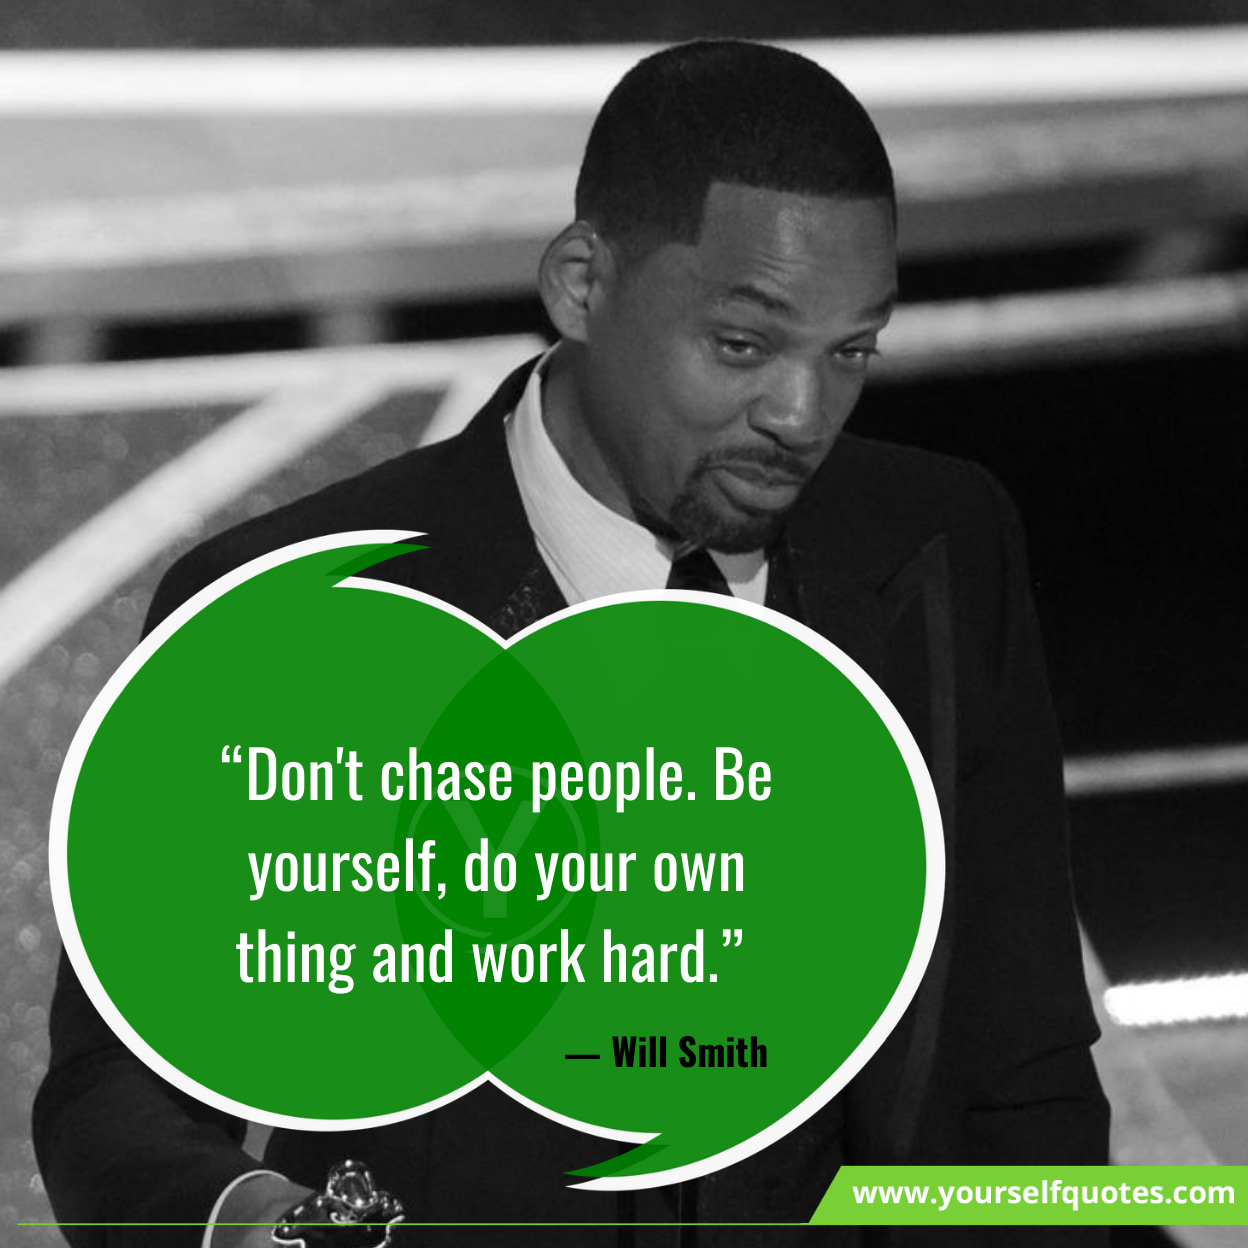 Will Smith Motivational Quotes 